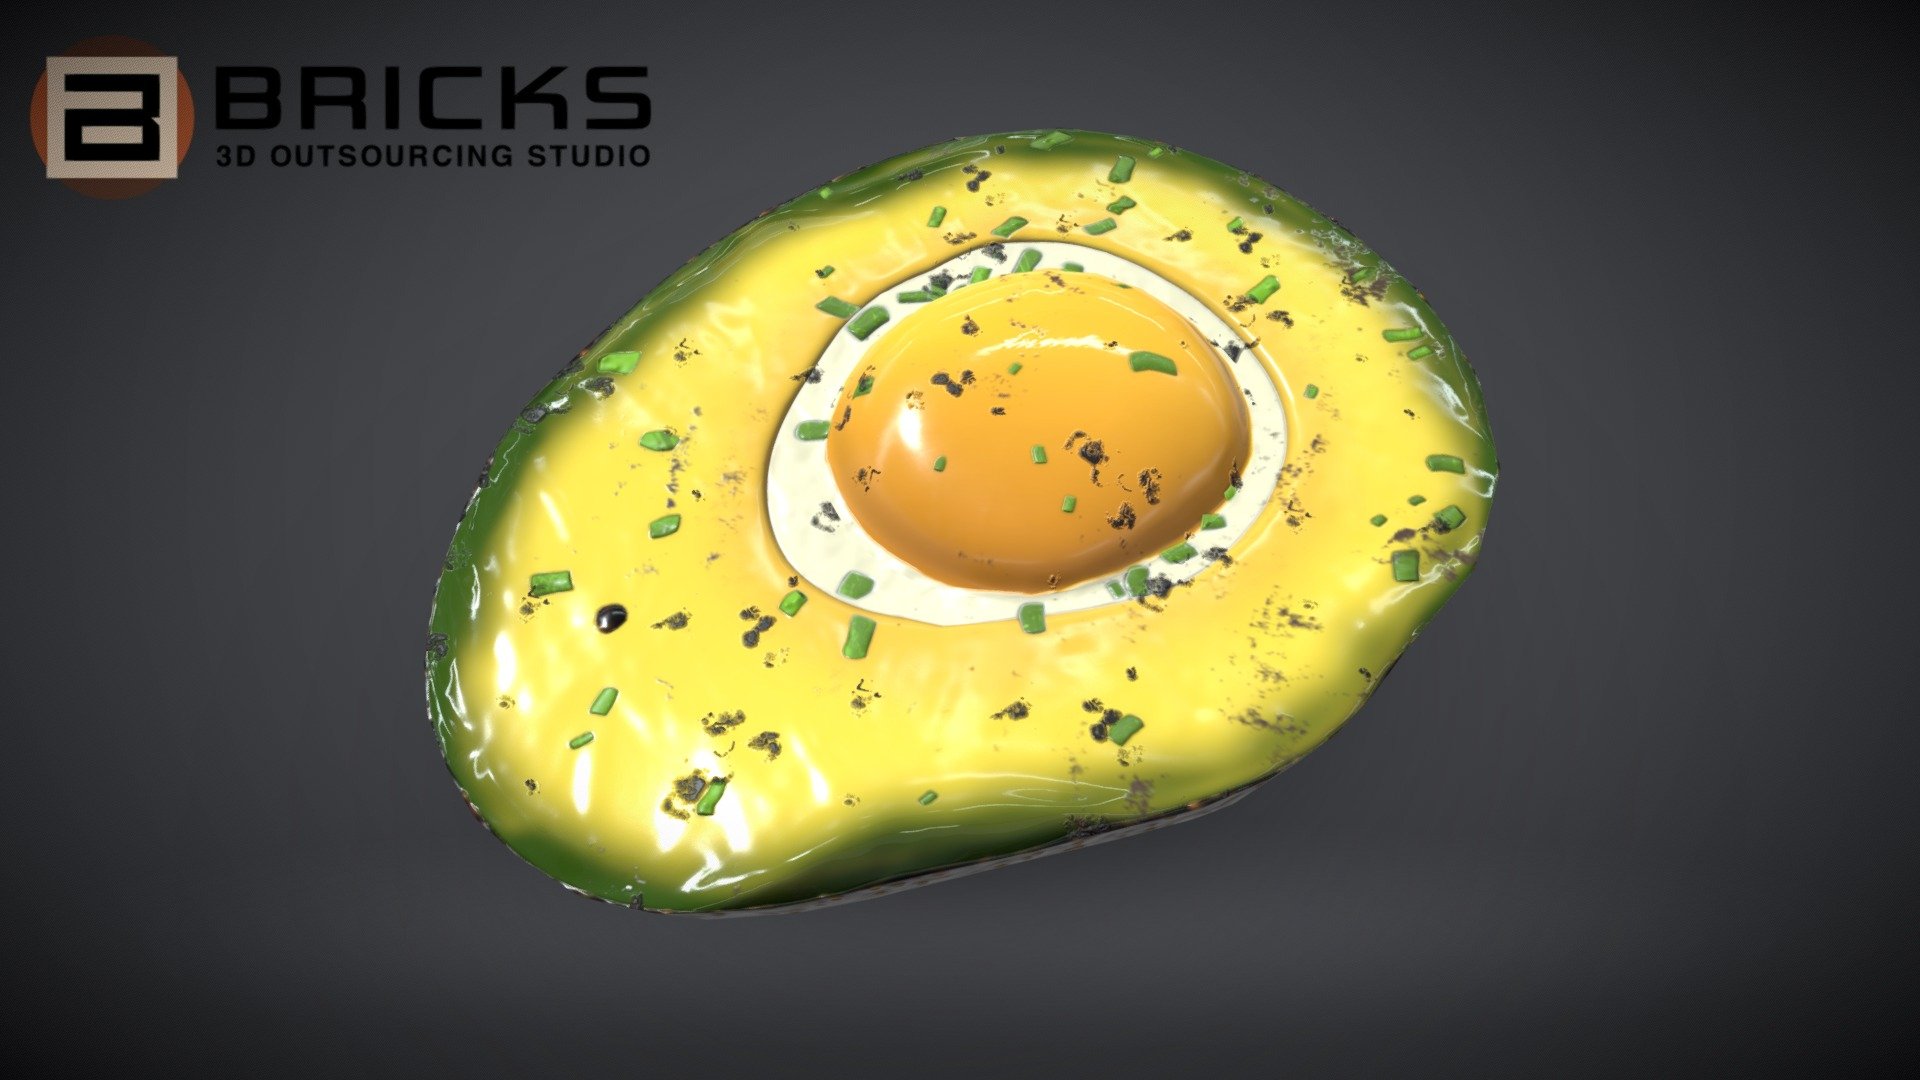 PBR Food Asset:
EggAvocadoBaked
Polycount: 962
Vertex count: 483
Texture Size: 2048px x 2048px
Normal: OpenGL

If you need any adjust in file please contact us: team@bricks3dstudio.com

Hire us: tringuyen@bricks3dstudio.com
Here is us: https://www.bricks3dstudio.com/
        https://www.artstation.com/bricksstudio
        https://www.facebook.com/Bricks3dstudio/
        https://www.linkedin.com/in/bricks-studio-b10462252/ - EggAvocadoBaked - Buy Royalty Free 3D model by Bricks Studio (@bricks3dstudio) 3d model